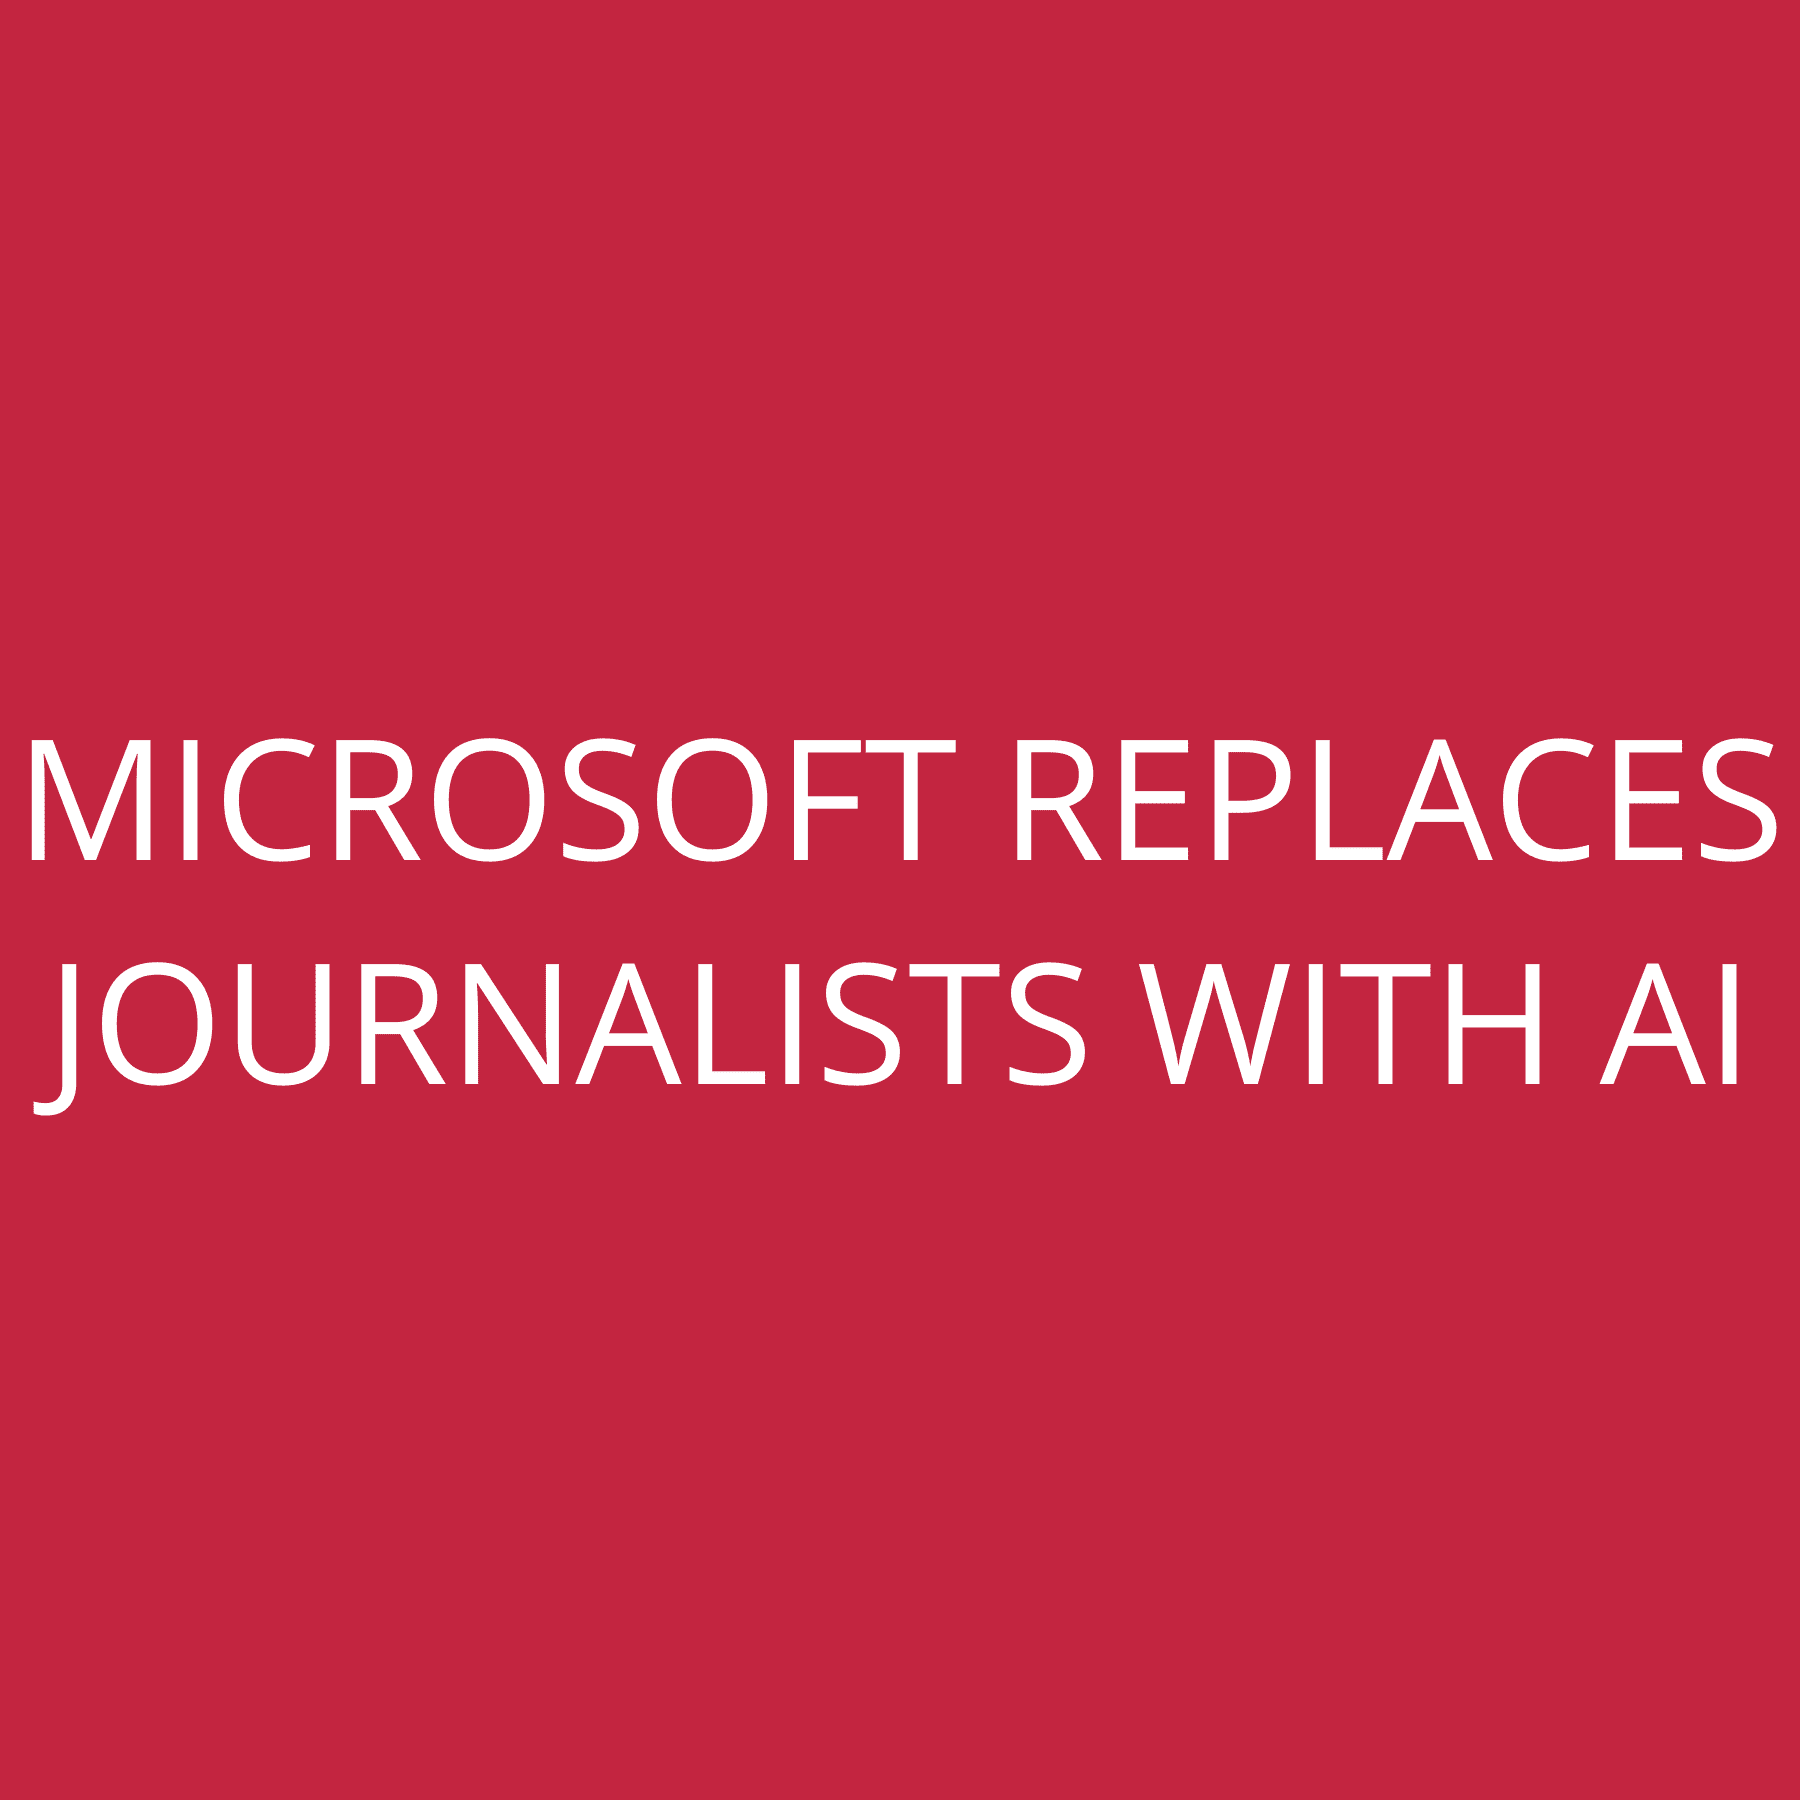 Microsoft replaces journalists with AI